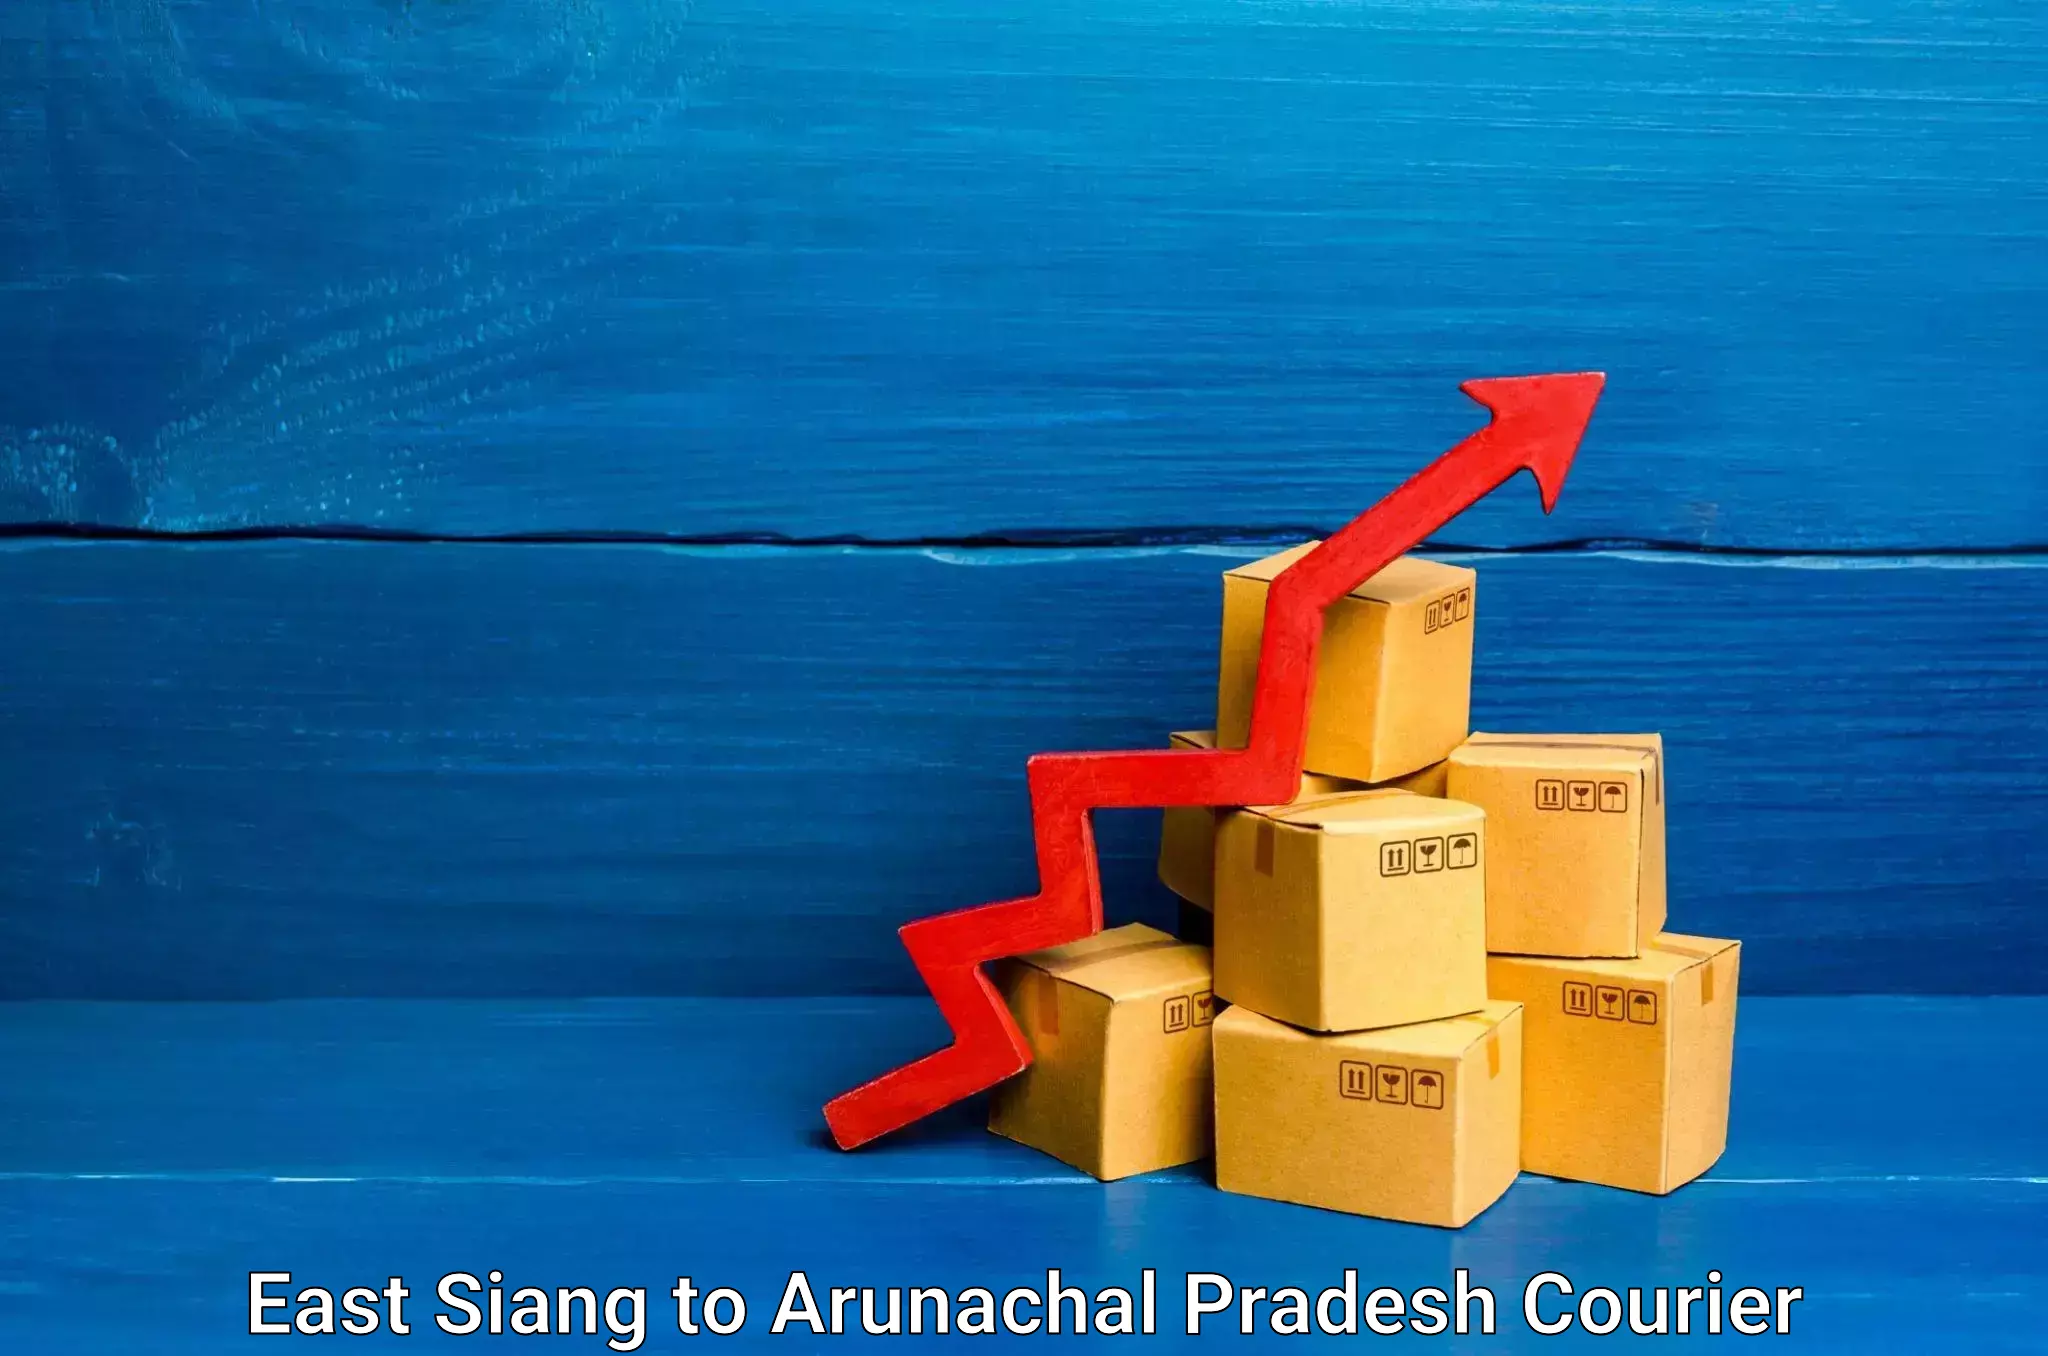 State-of-the-art courier technology East Siang to Arunachal Pradesh